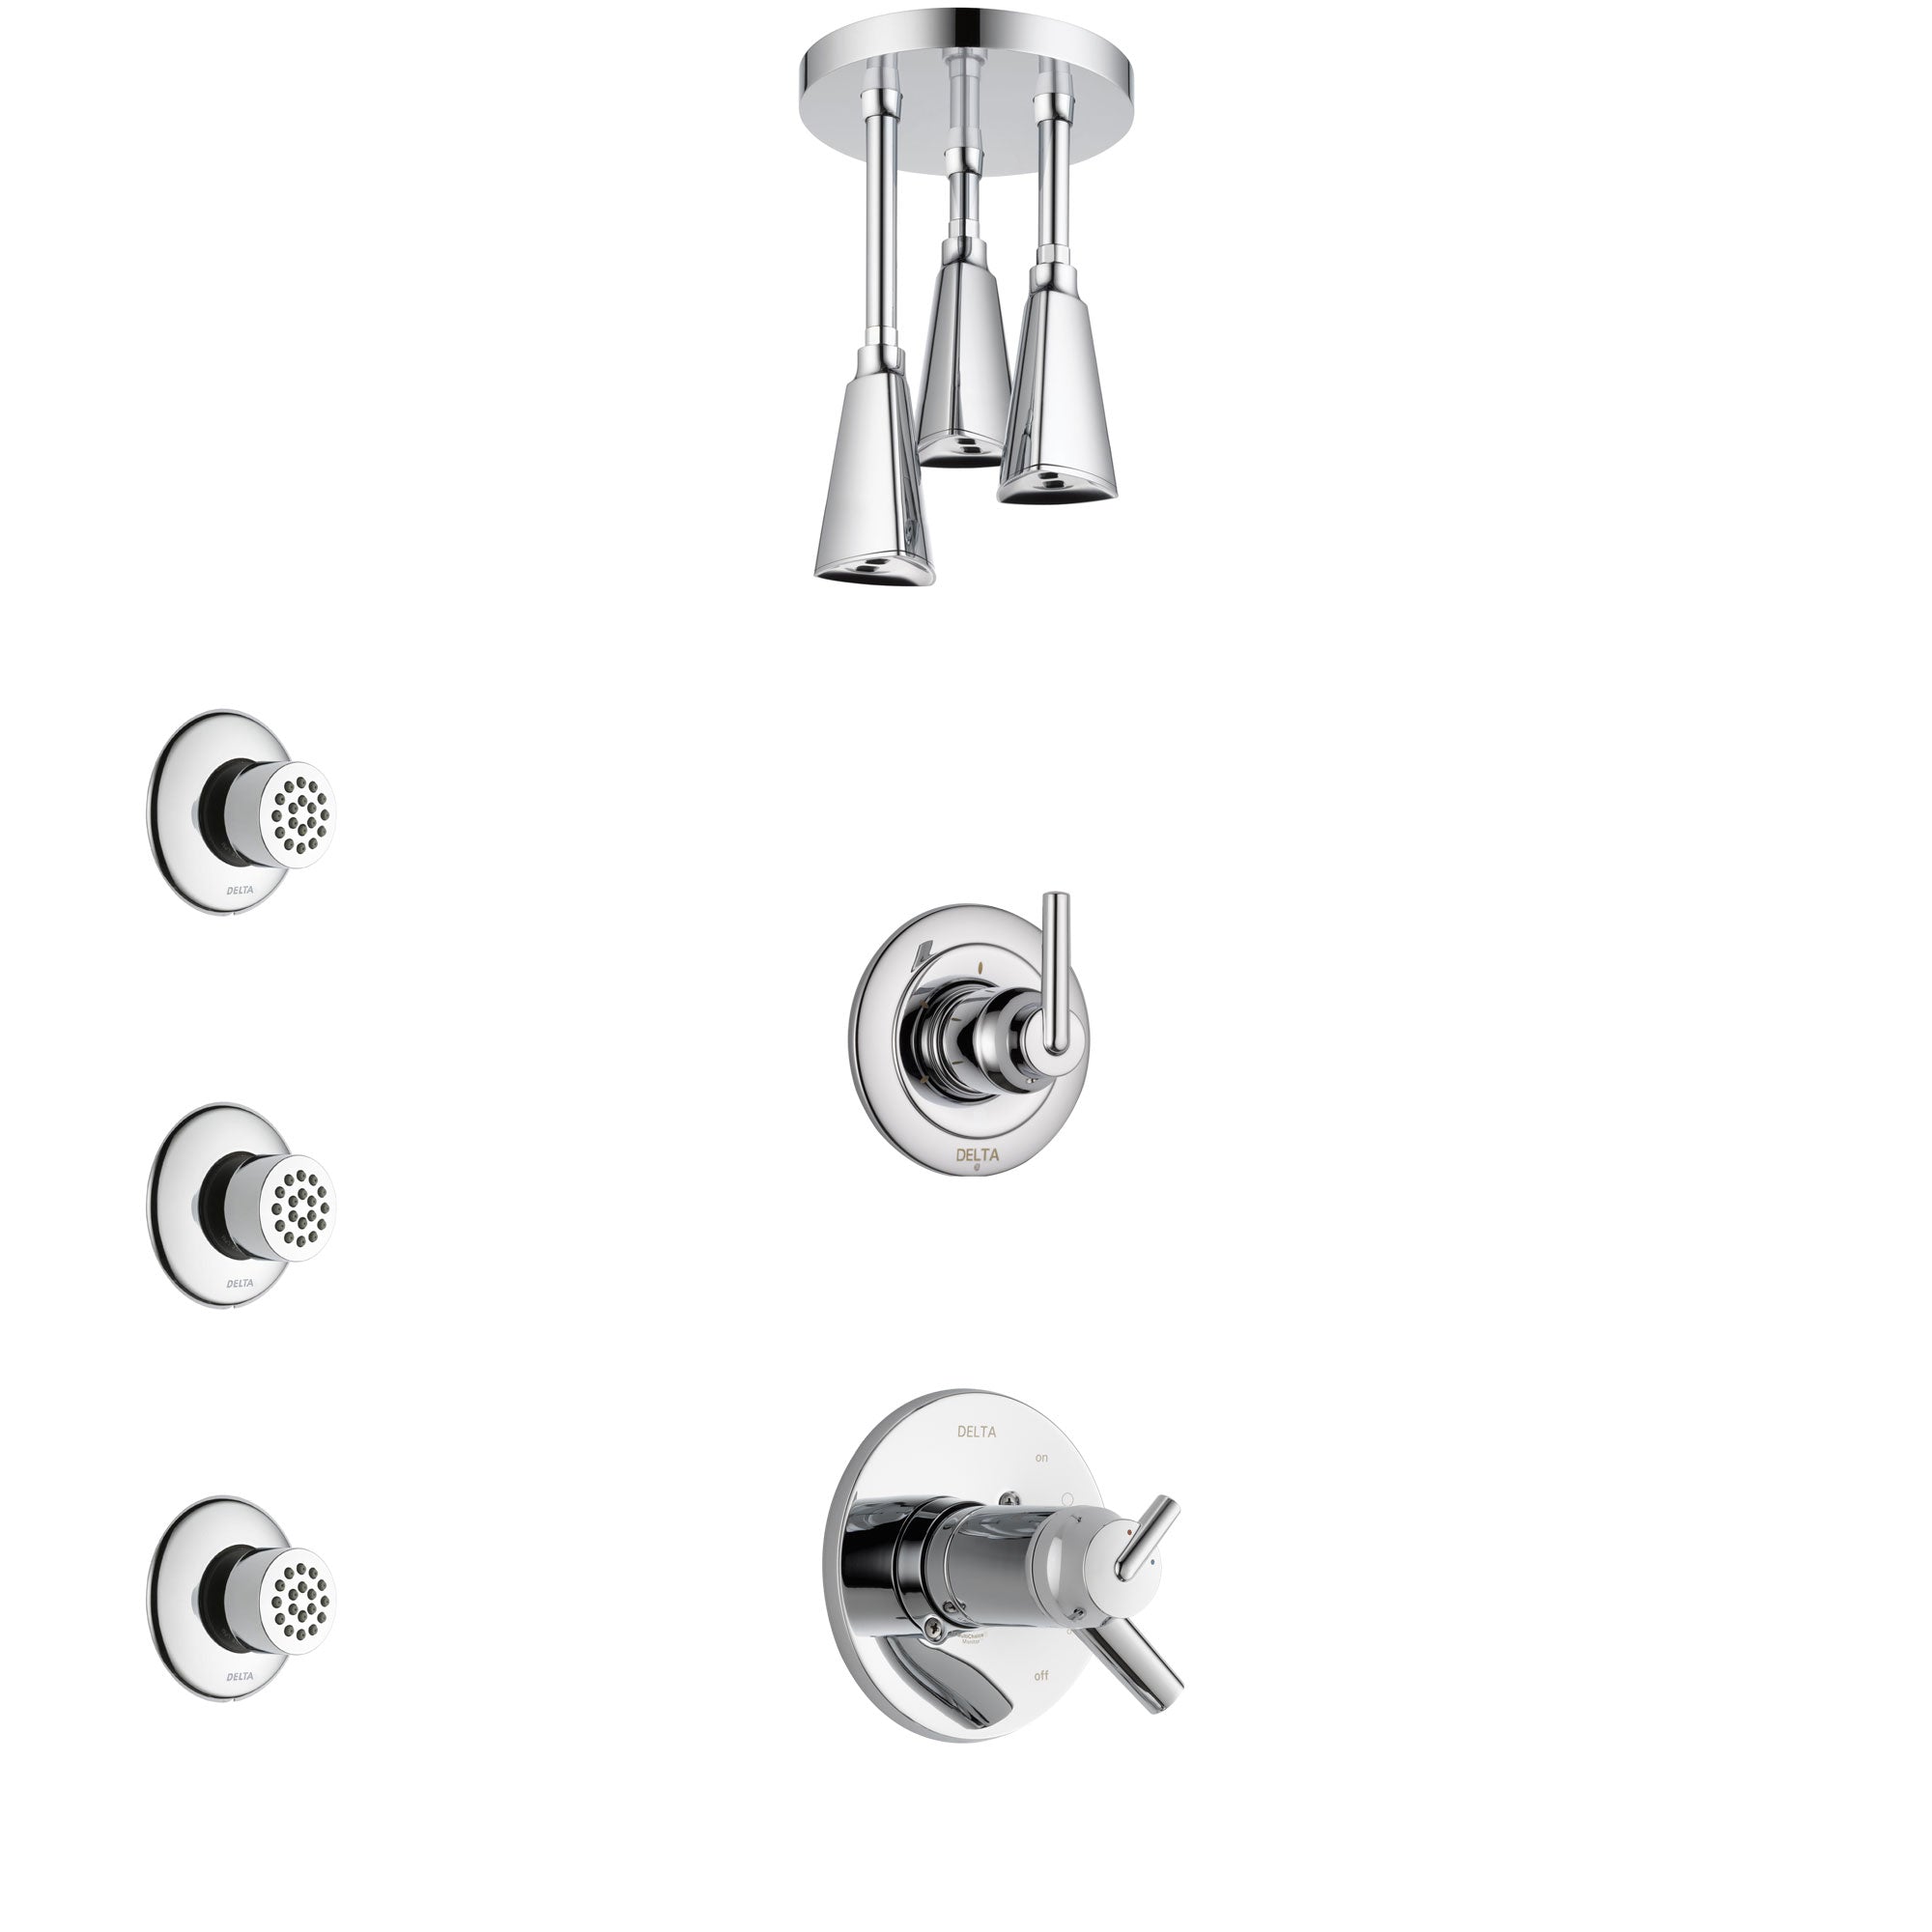 Delta Trinsic Chrome Finish Shower System with Dual Thermostatic Control Handle, Diverter, Ceiling Mount Showerhead, and 3 Body Sprays SS17T5926